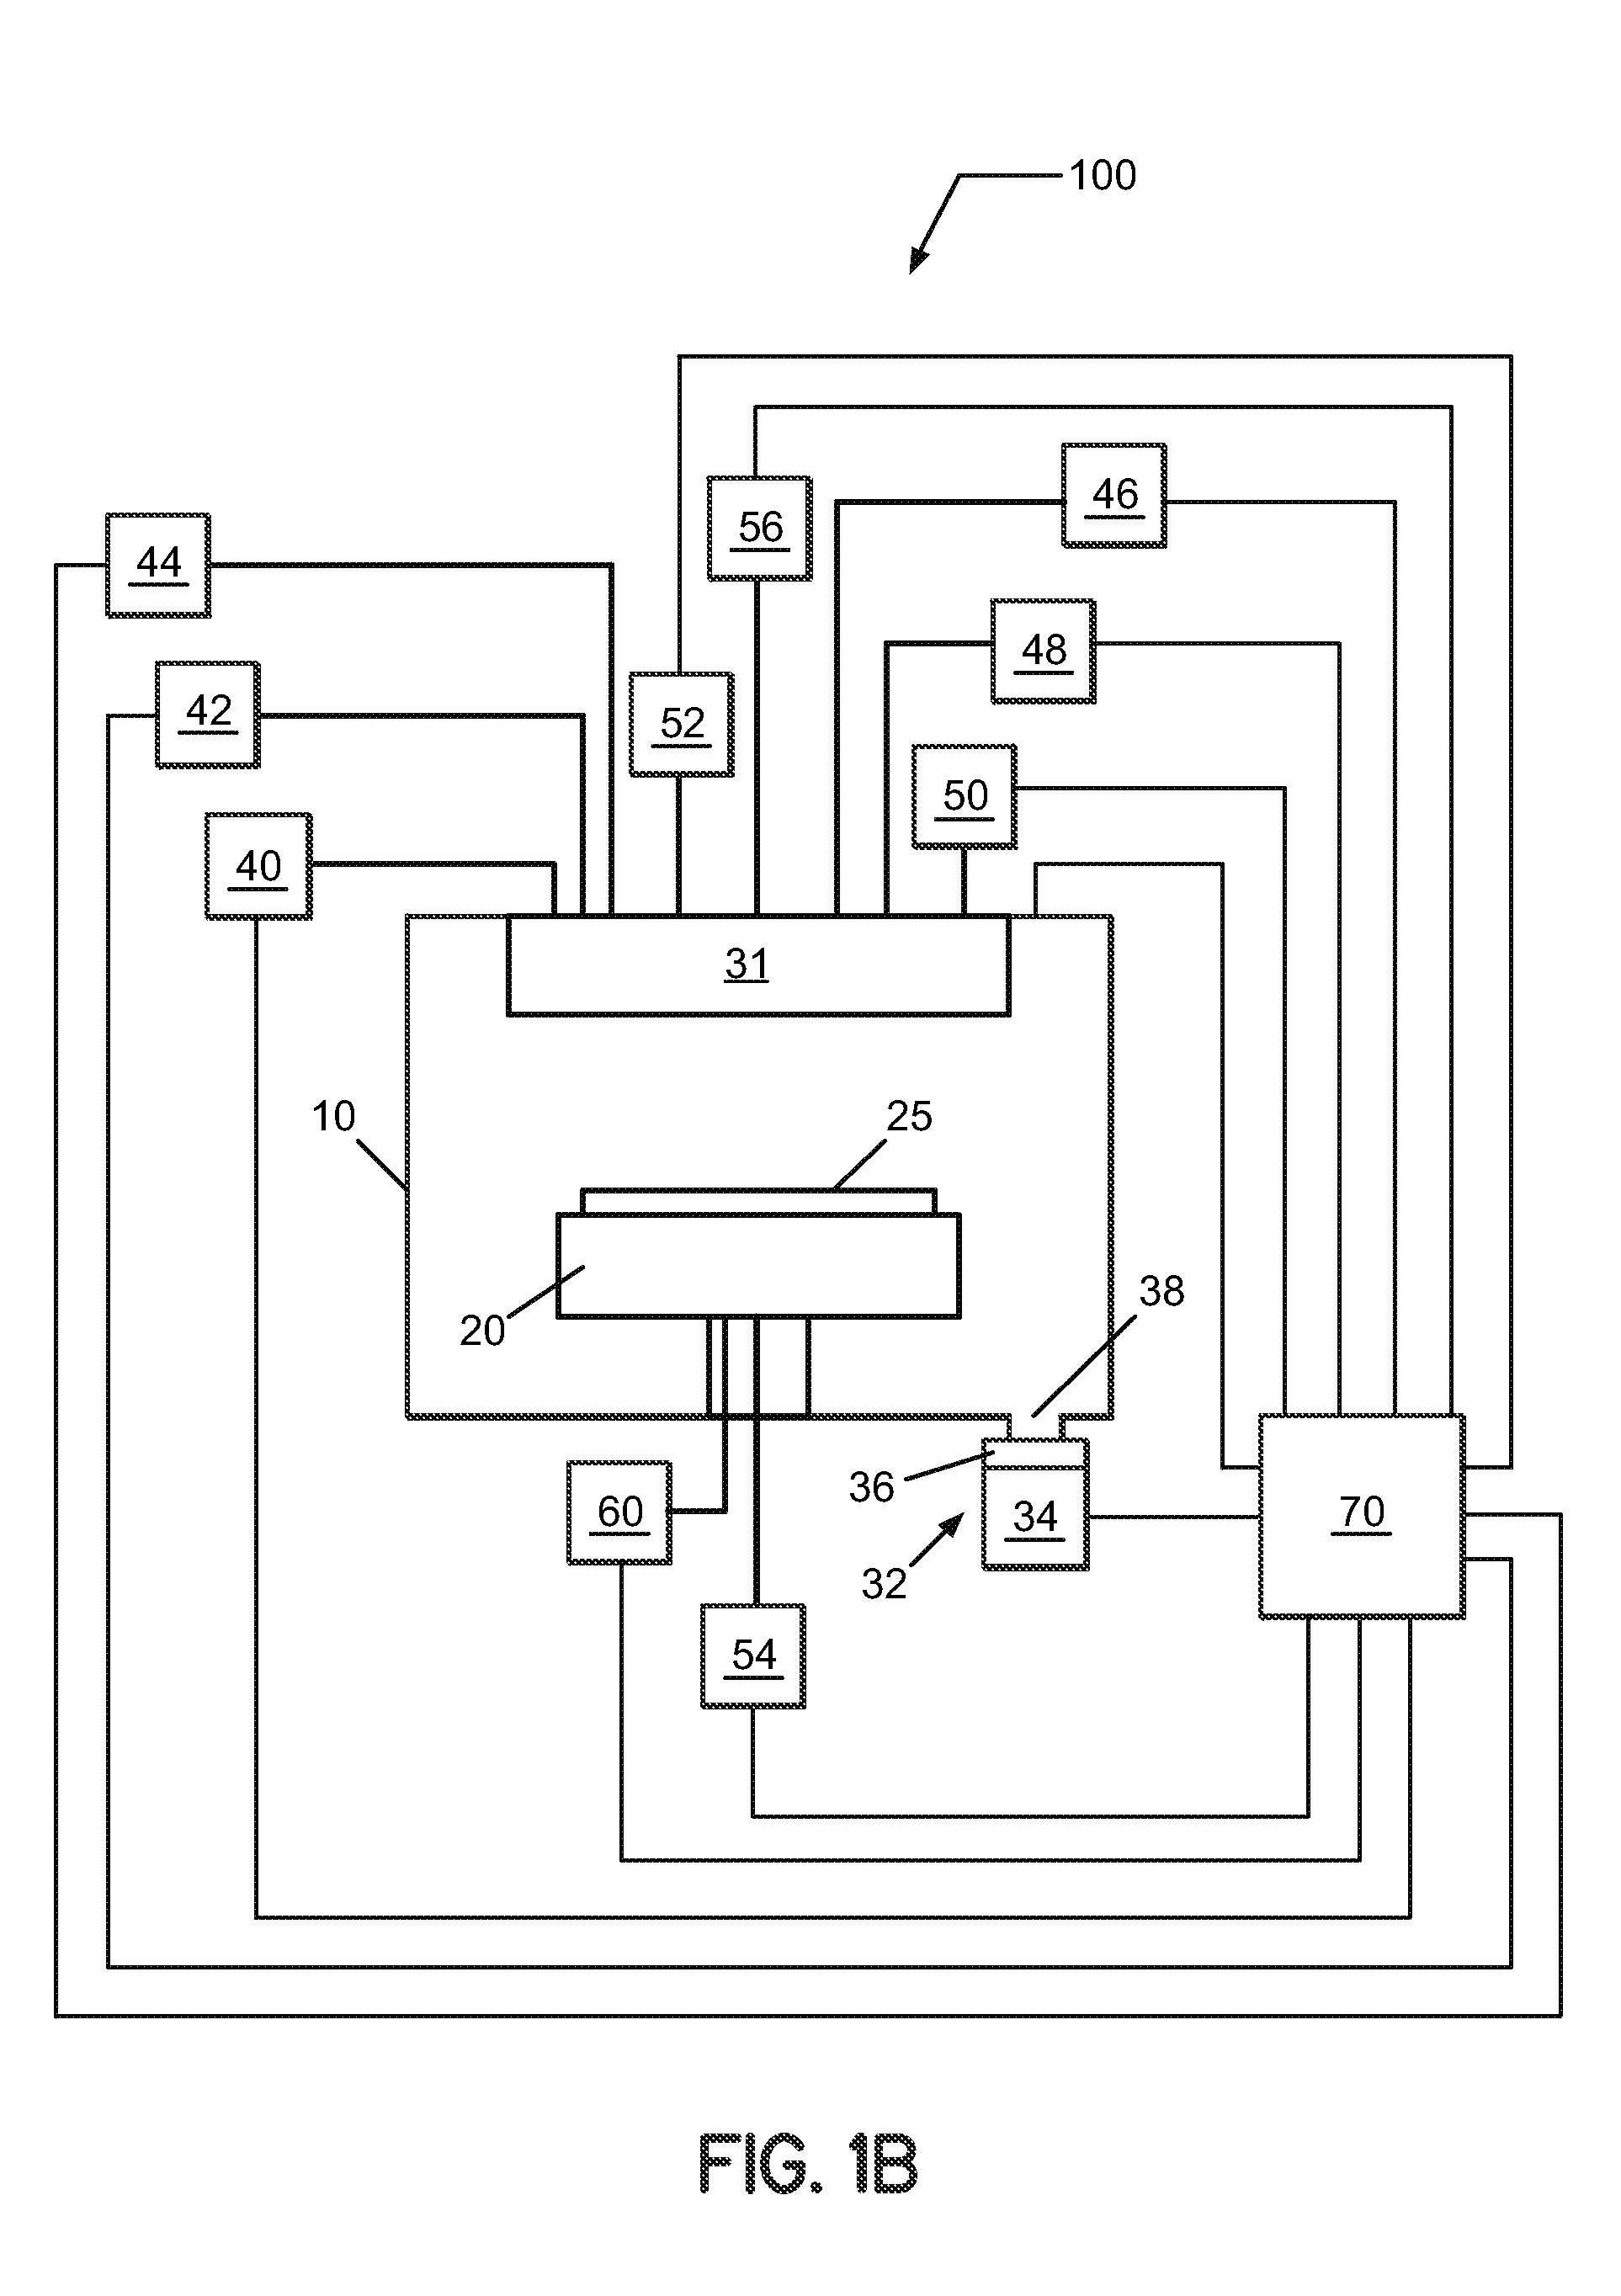 Method of forming mixed rare earth oxide and aluminate films by atomic layer deposition